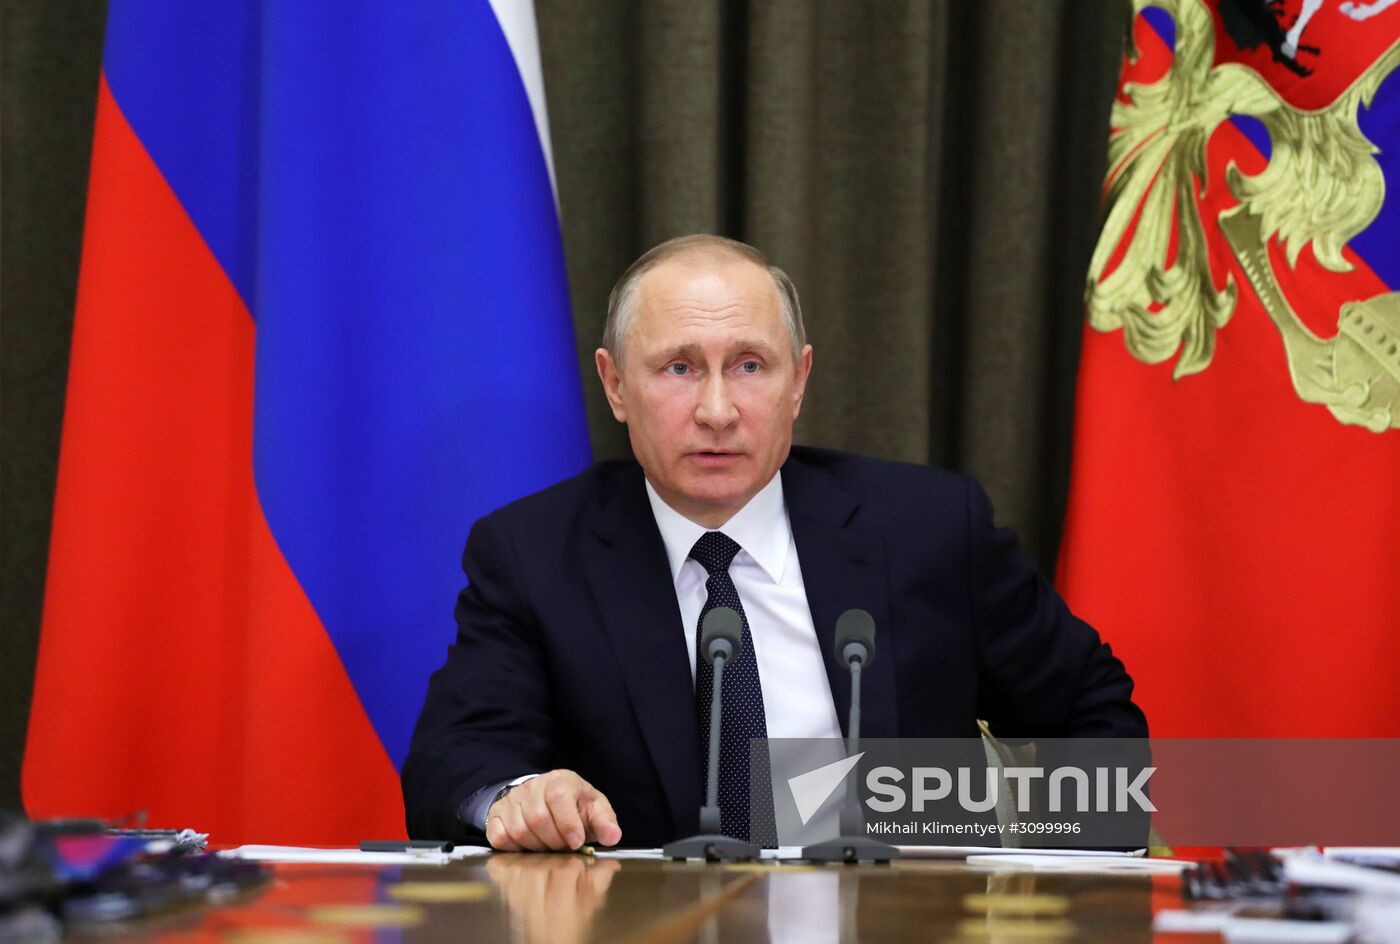 Russian President Vladimir Putin holds meeting with leaders of Defense Ministry and Military-Industrial Complex